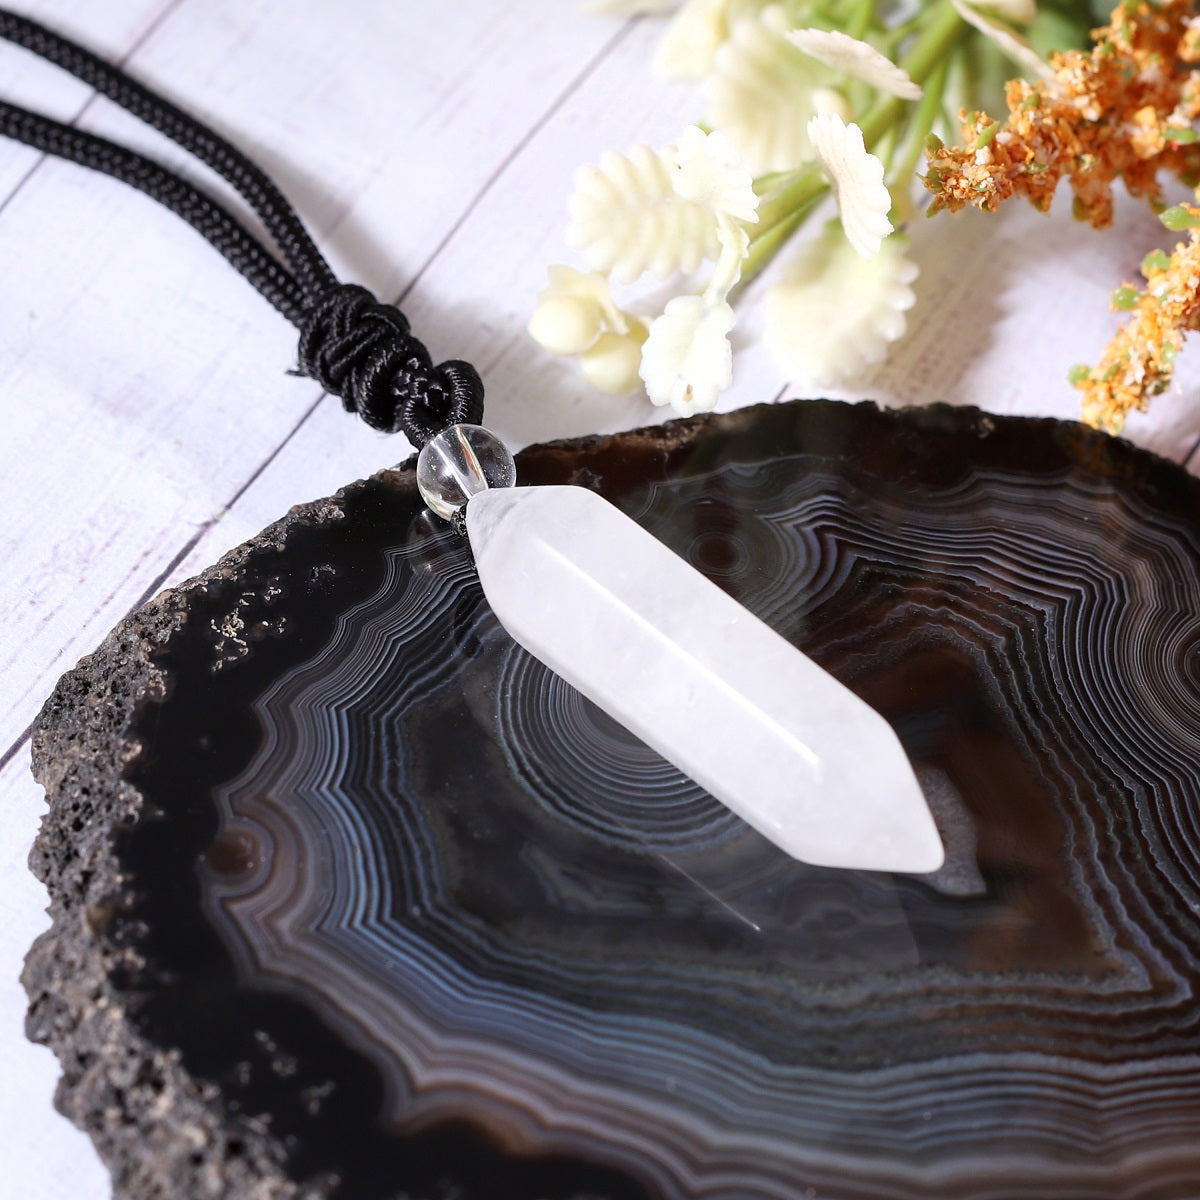 A detailed view of the artistic and intricate wrapping design that surrounds the white quartz gemstone, adding a touch of elegance to the pendant necklace.